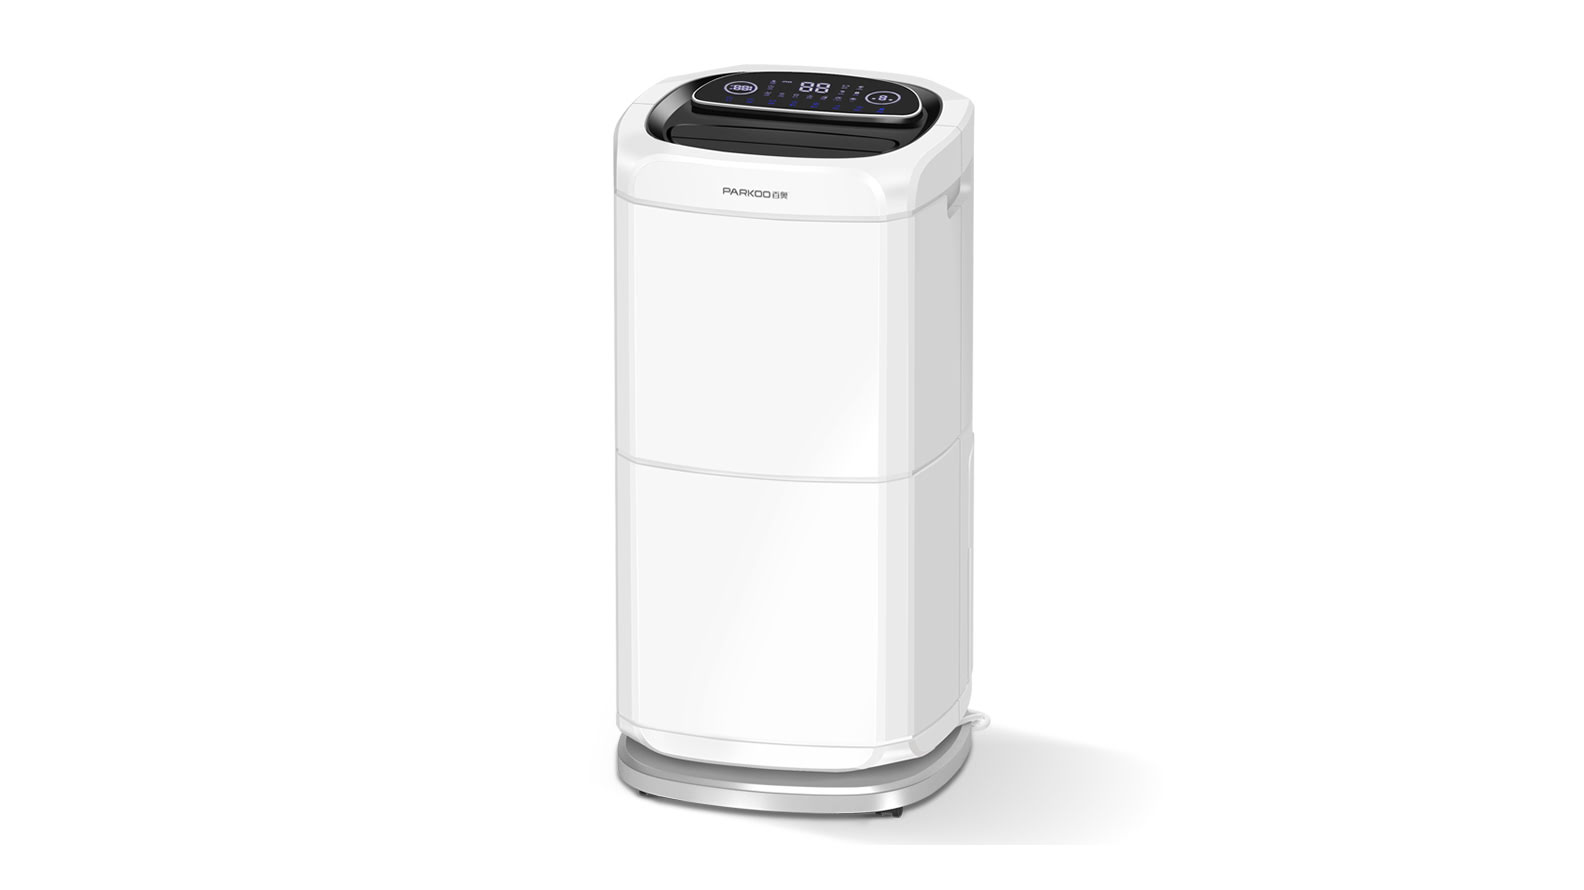 What brand of household dehumidifier is more cost-effective?